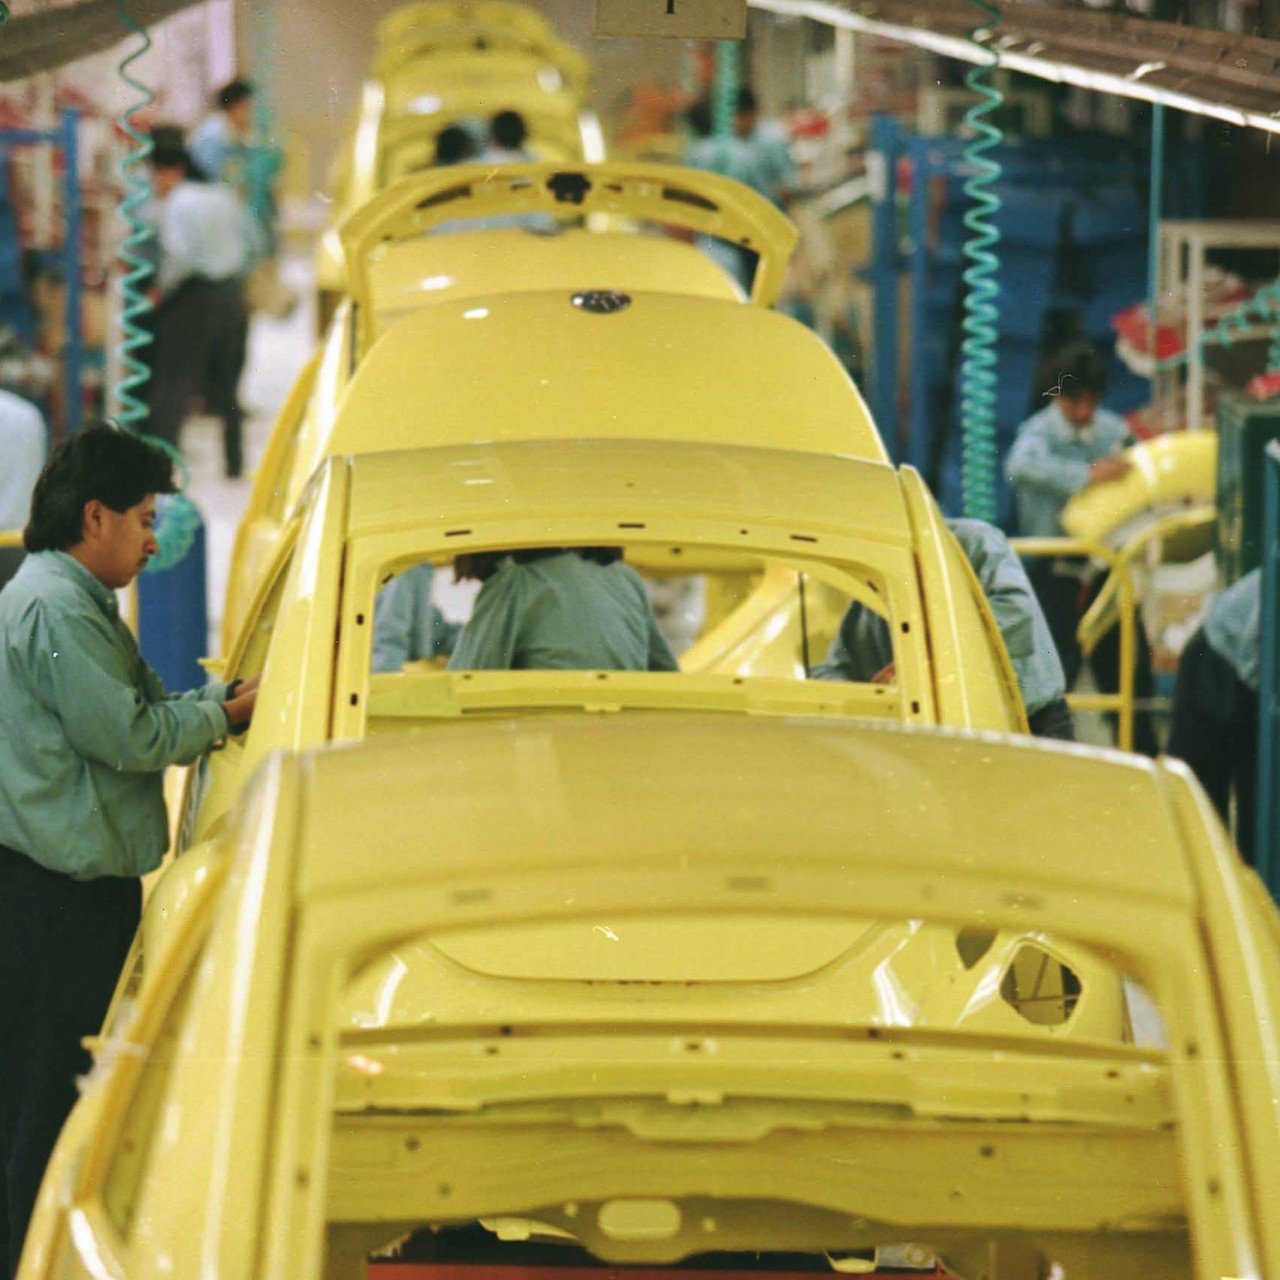 The manufacturing location of the new VW New Beetle from 1998 in Mexico.